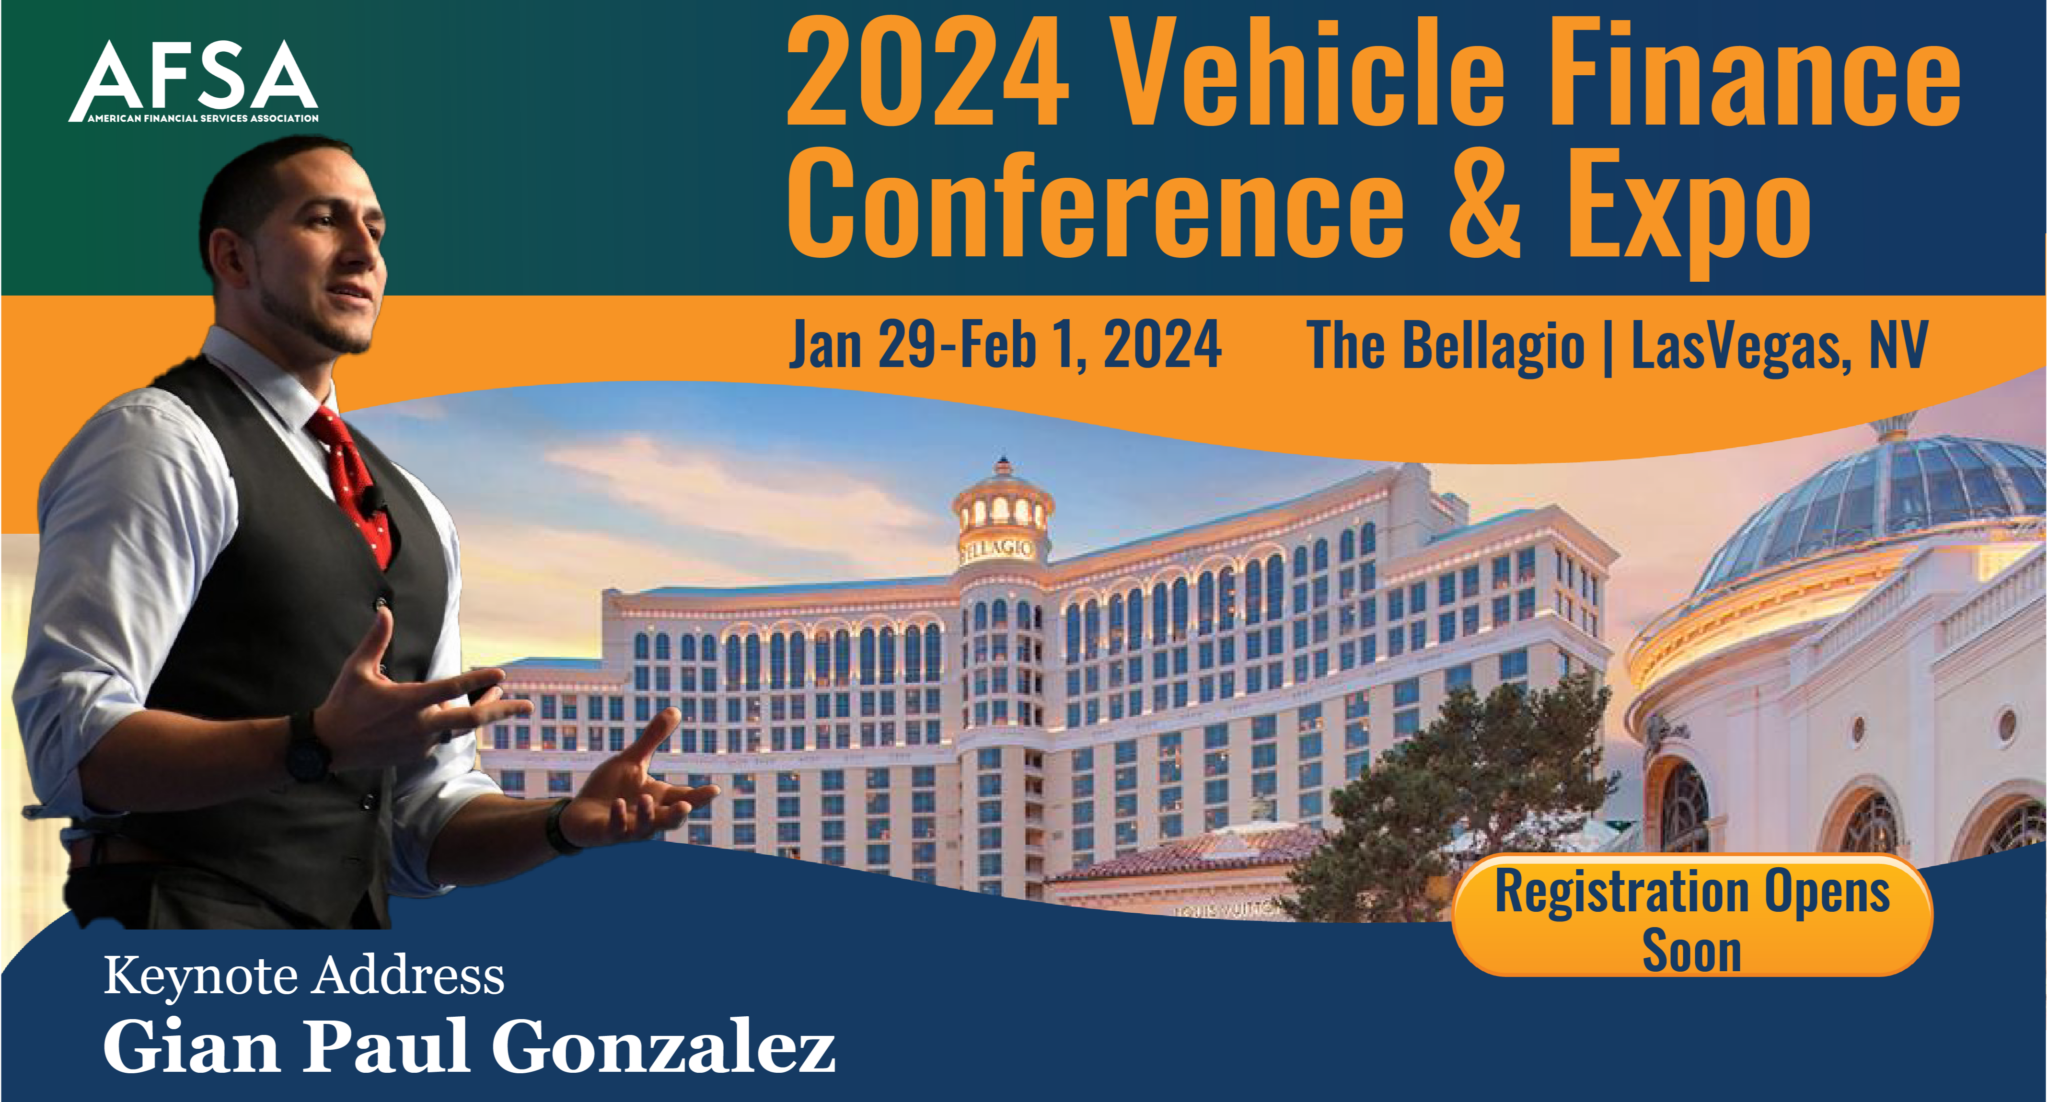 American Financial Services Association Save the Date 2024 Vehicle